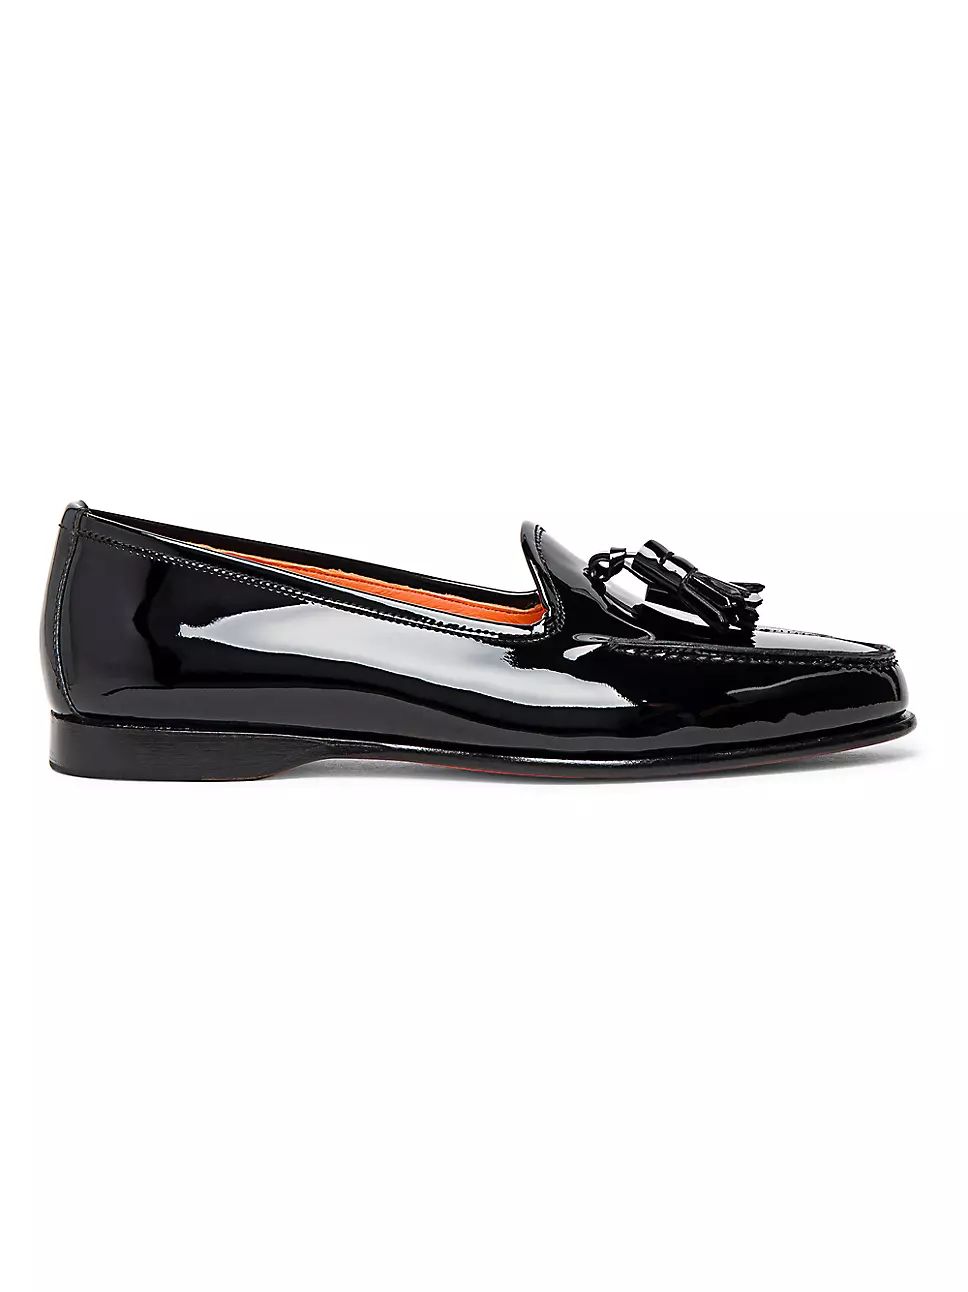 Andrea Patent Leather Tassel Loafers | Saks Fifth Avenue